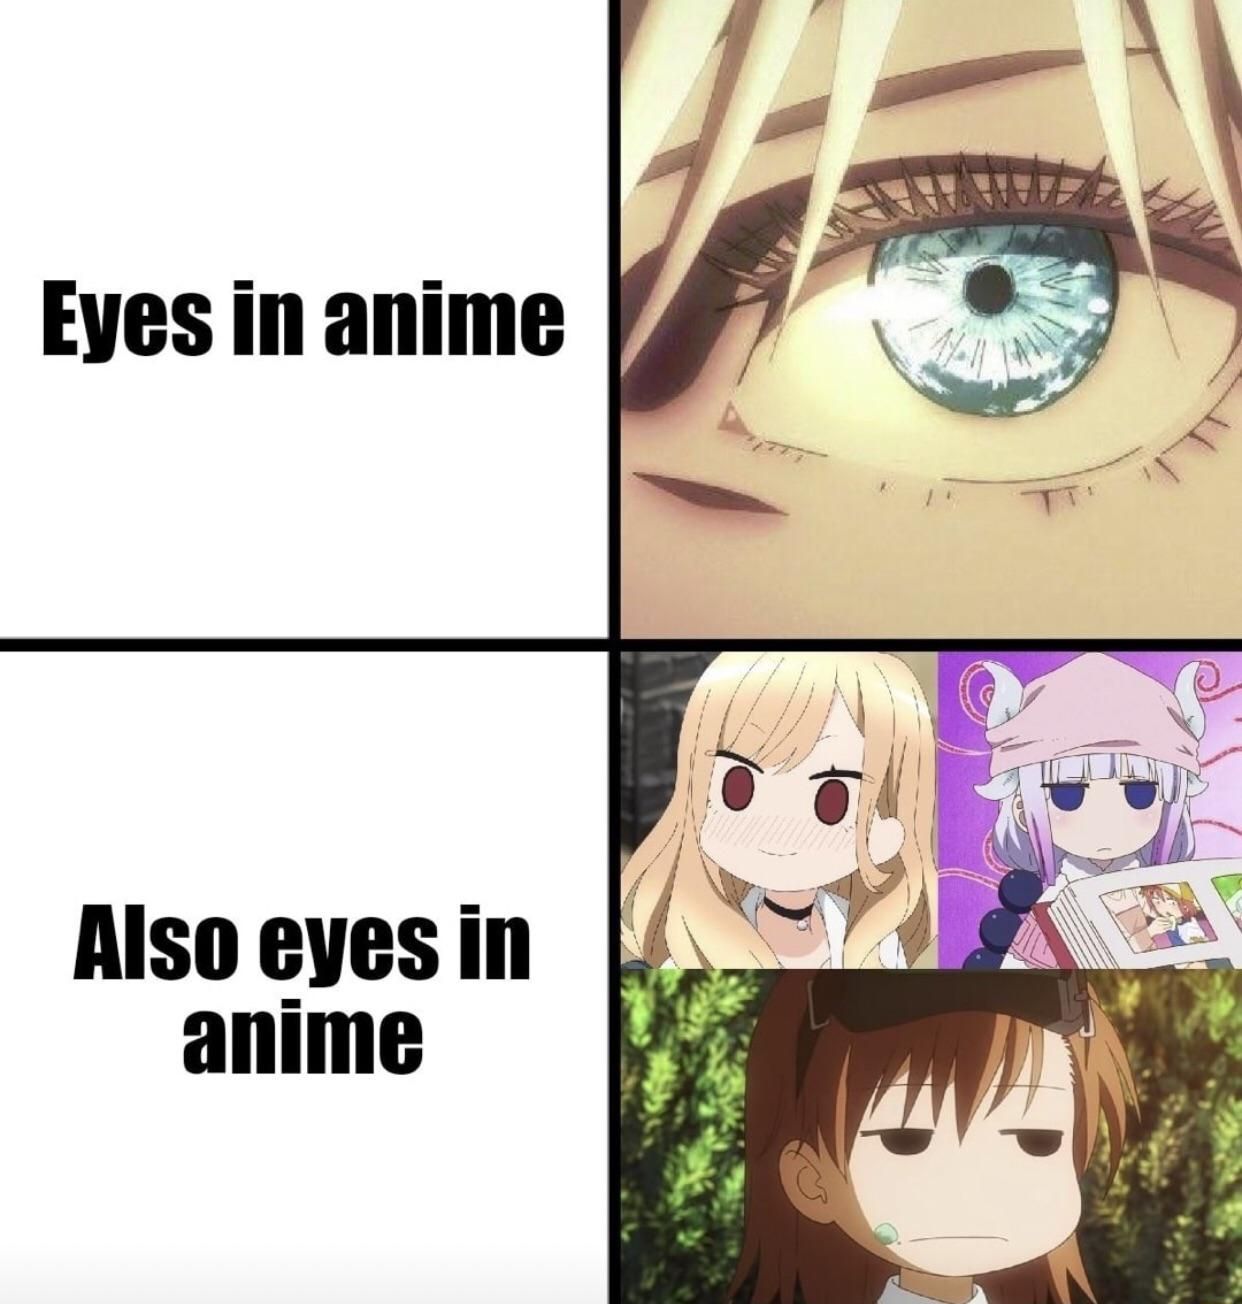 Eyes in anime are so realistic tho